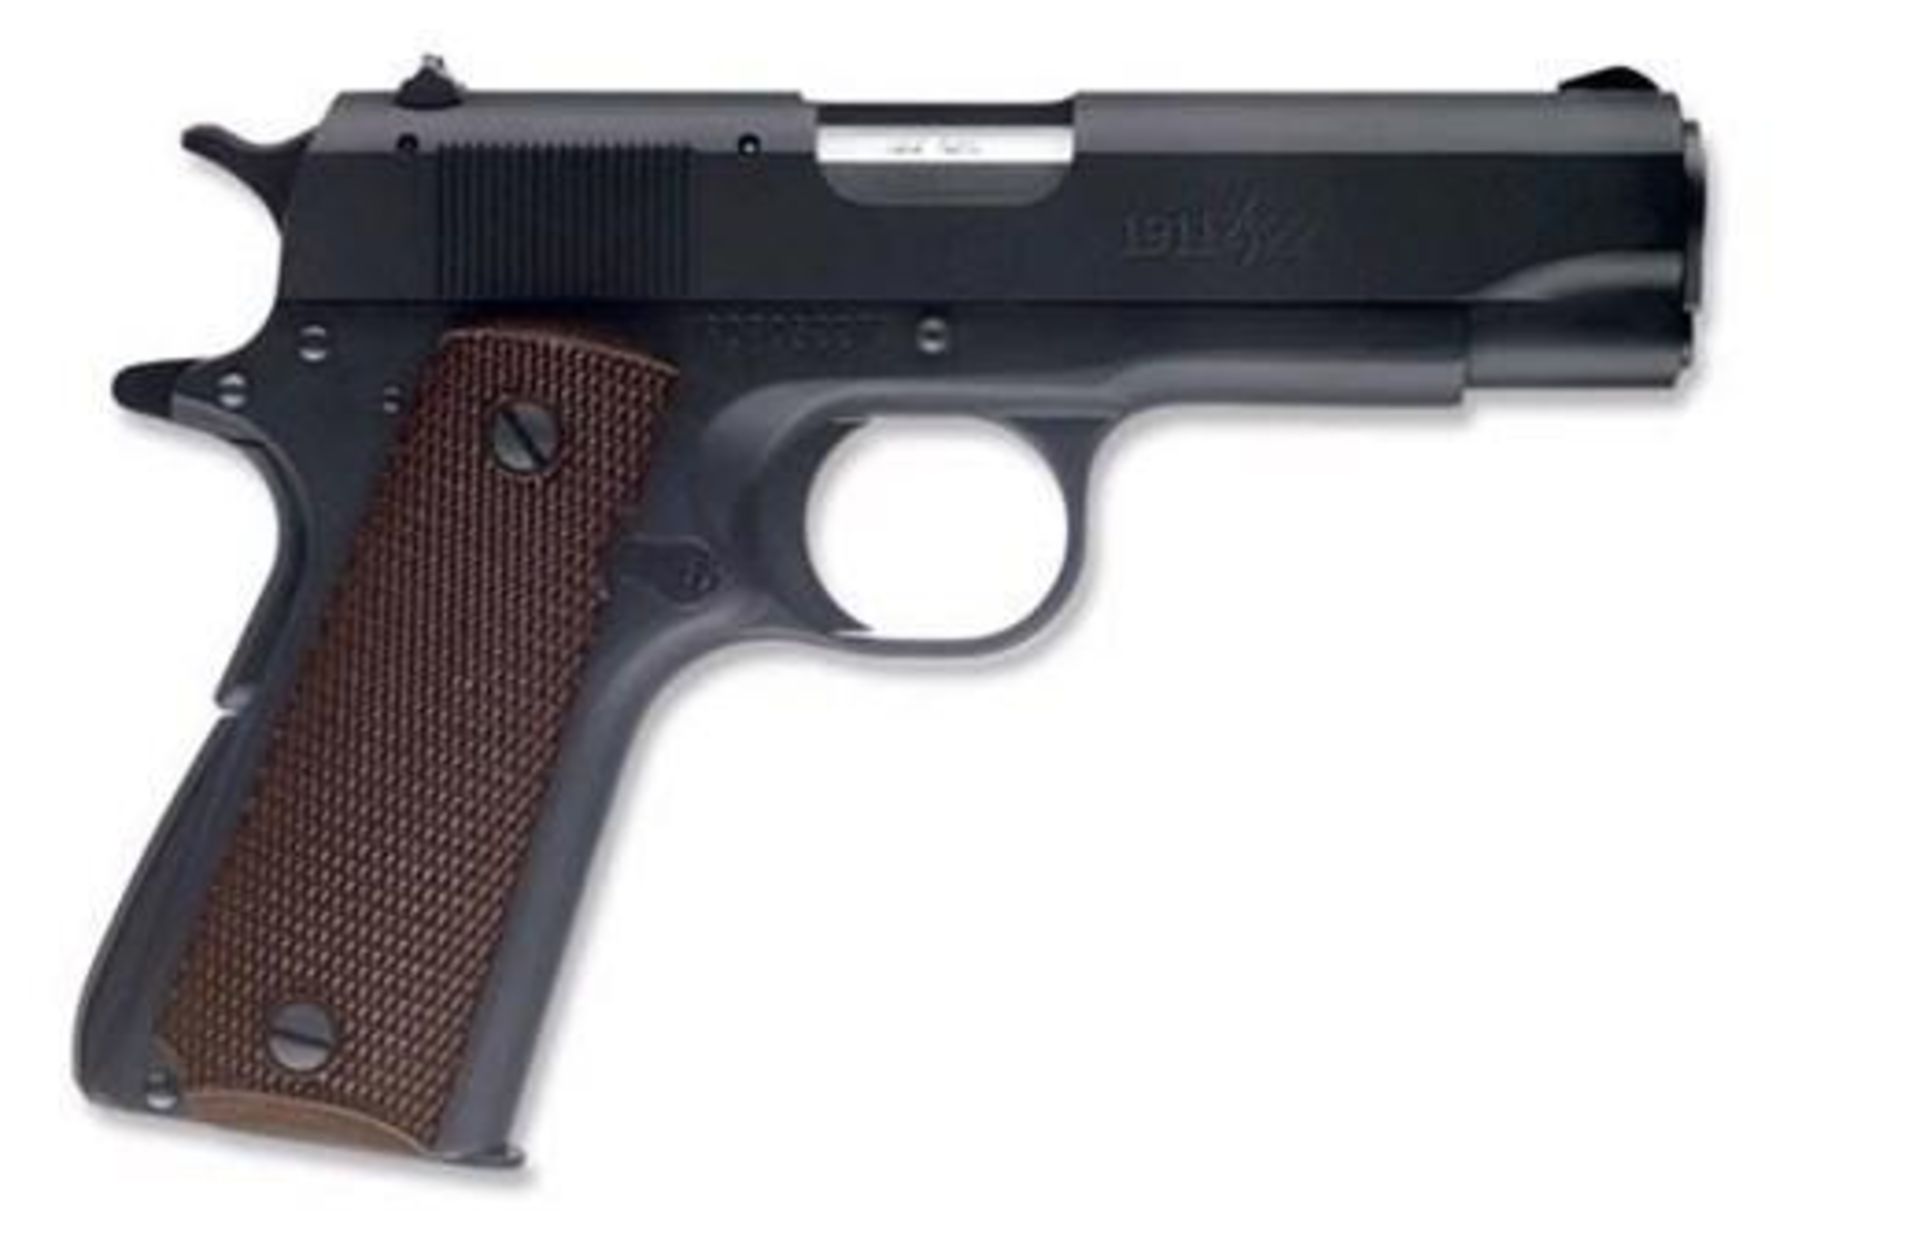 !NEW! BROWNING 1911-22 COMPACT 22 LR 023614072010